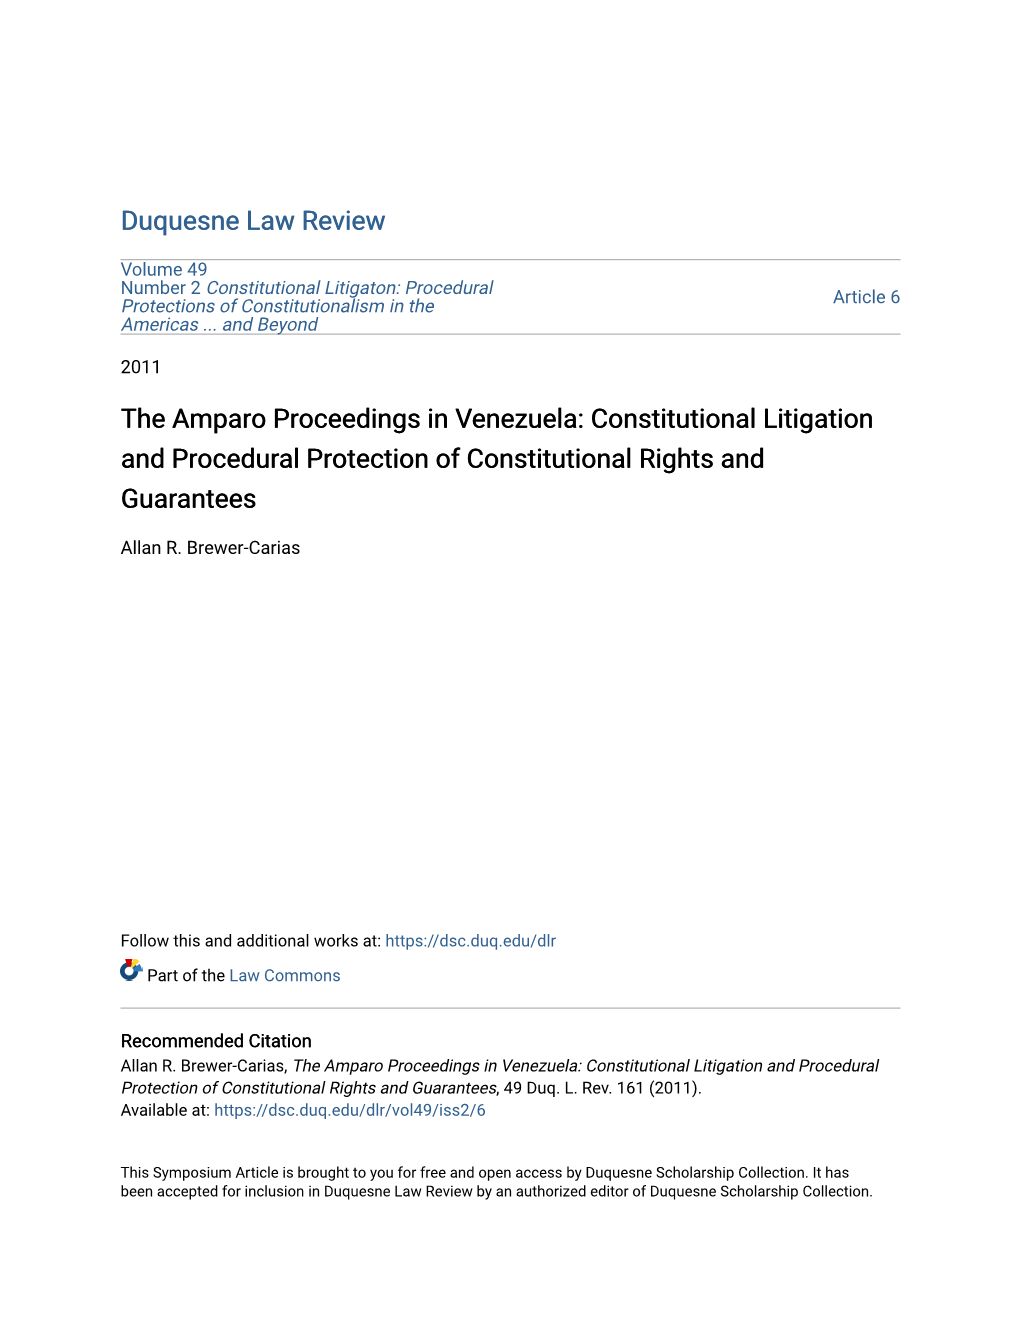 The Amparo Proceedings in Venezuela: Constitutional Litigation and Procedural Protection of Constitutional Rights and Guarantees